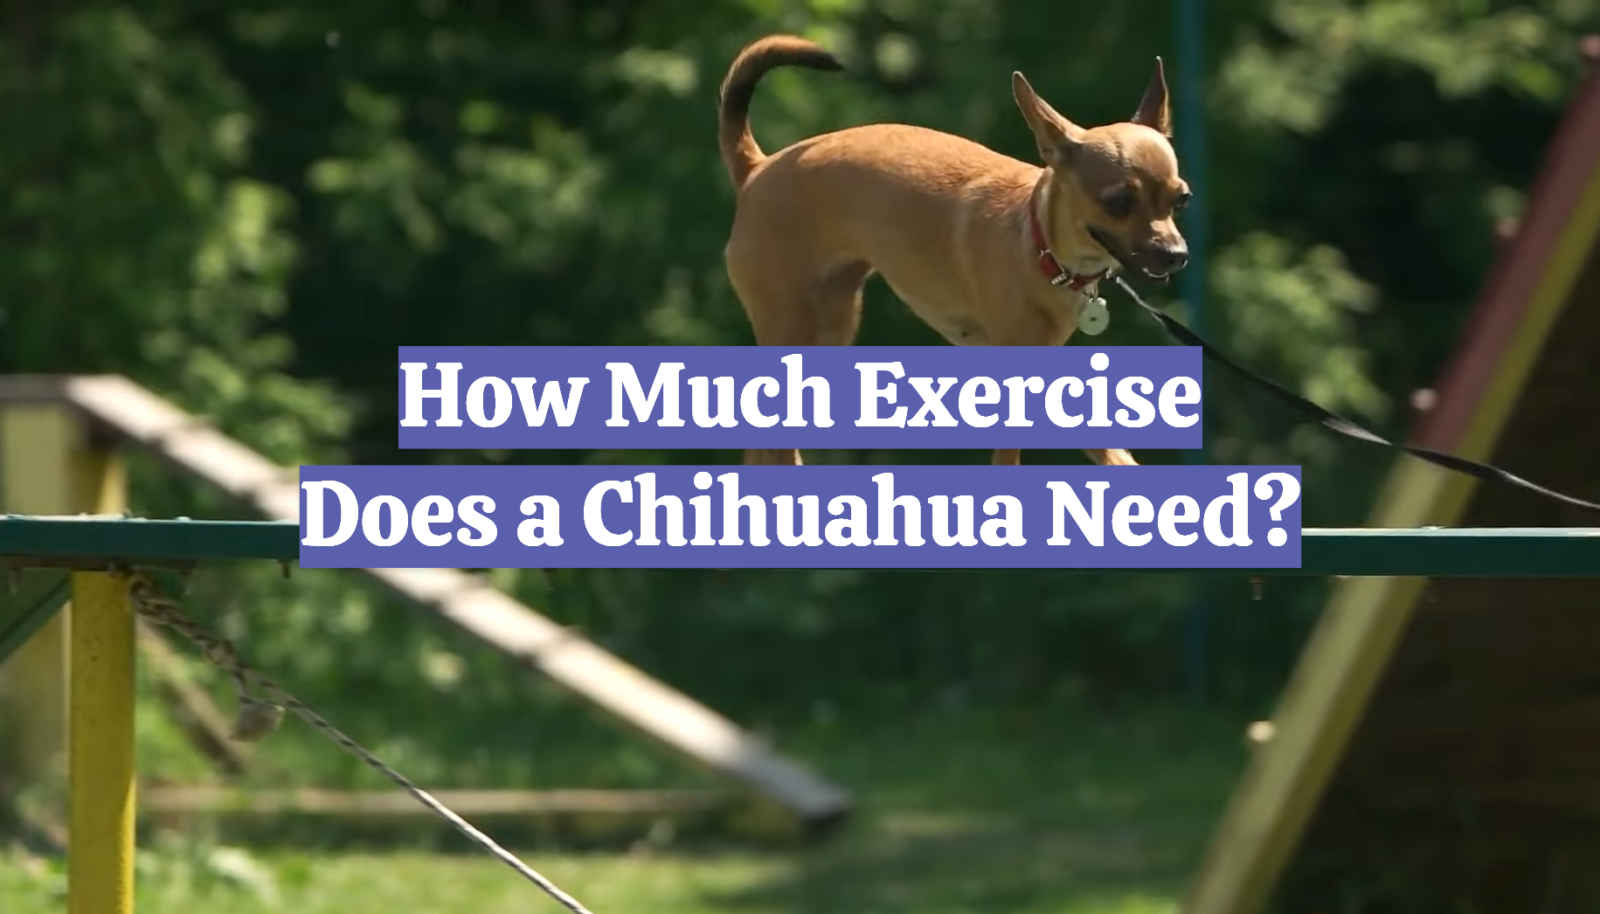 How Much Exercise Does a Chihuahua Need?